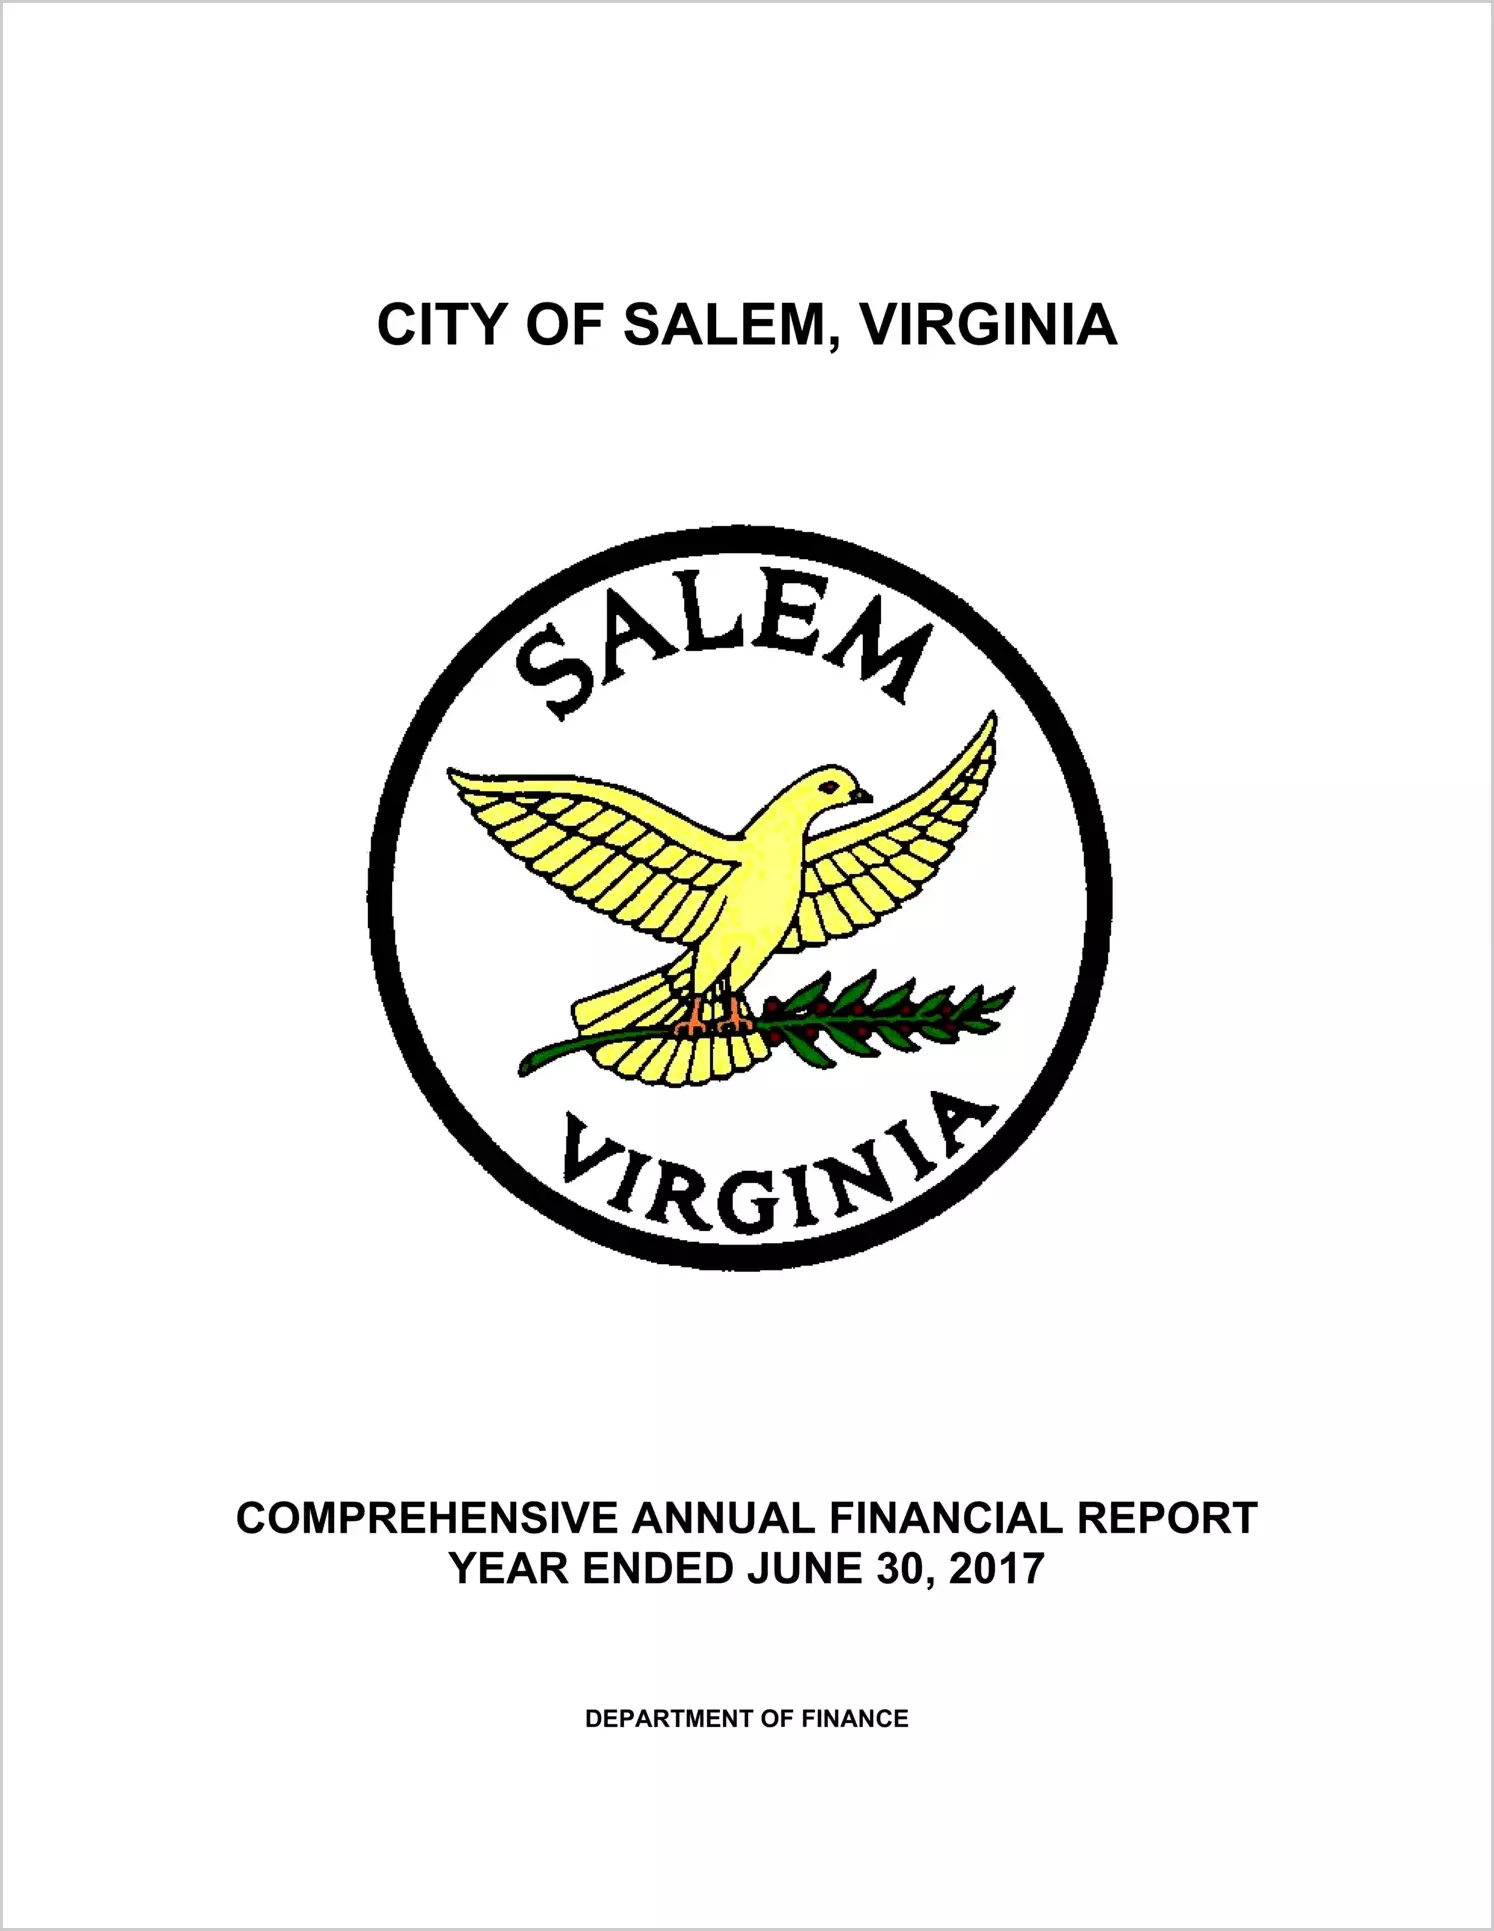 2017 Annual Financial Report for City of Salem